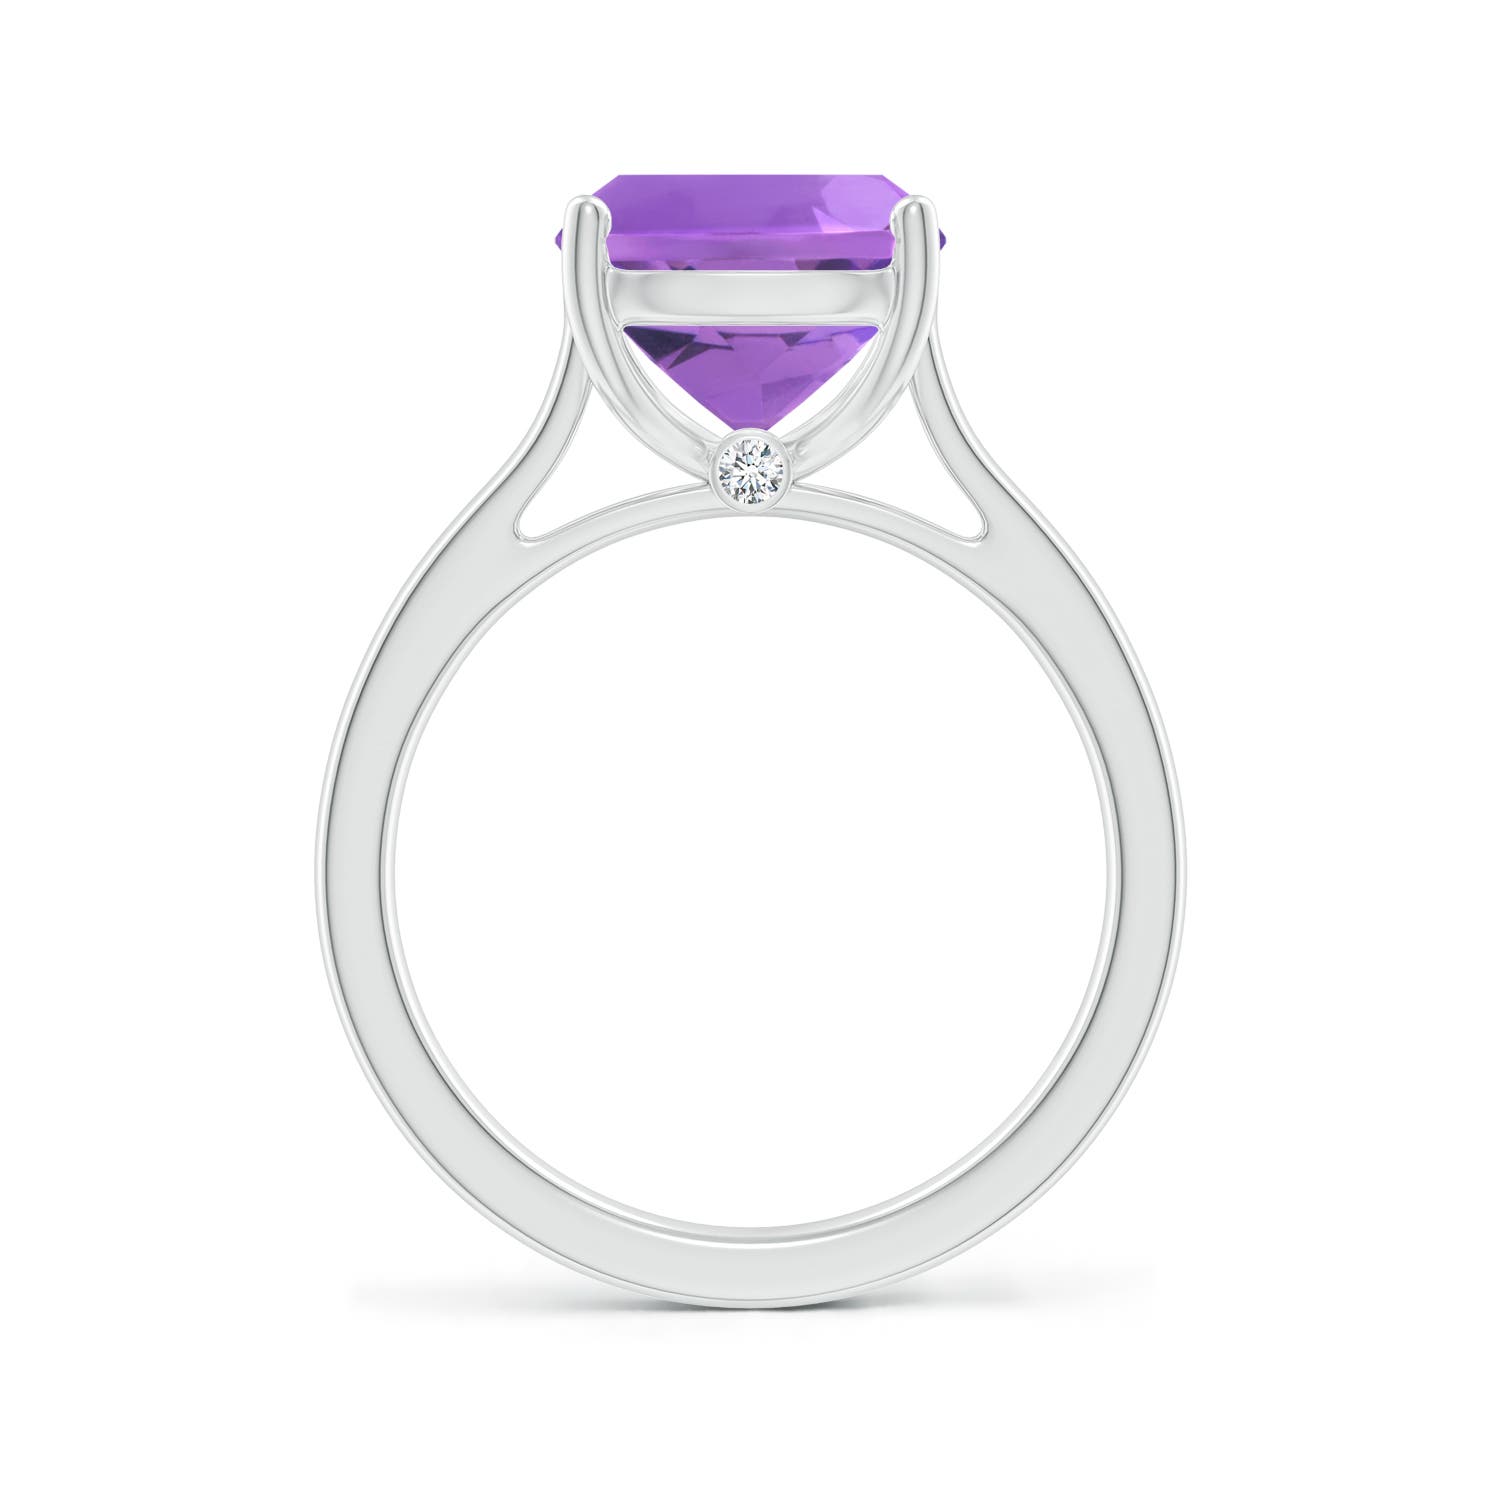 AA - Amethyst / 3.53 CT / 14 KT White Gold